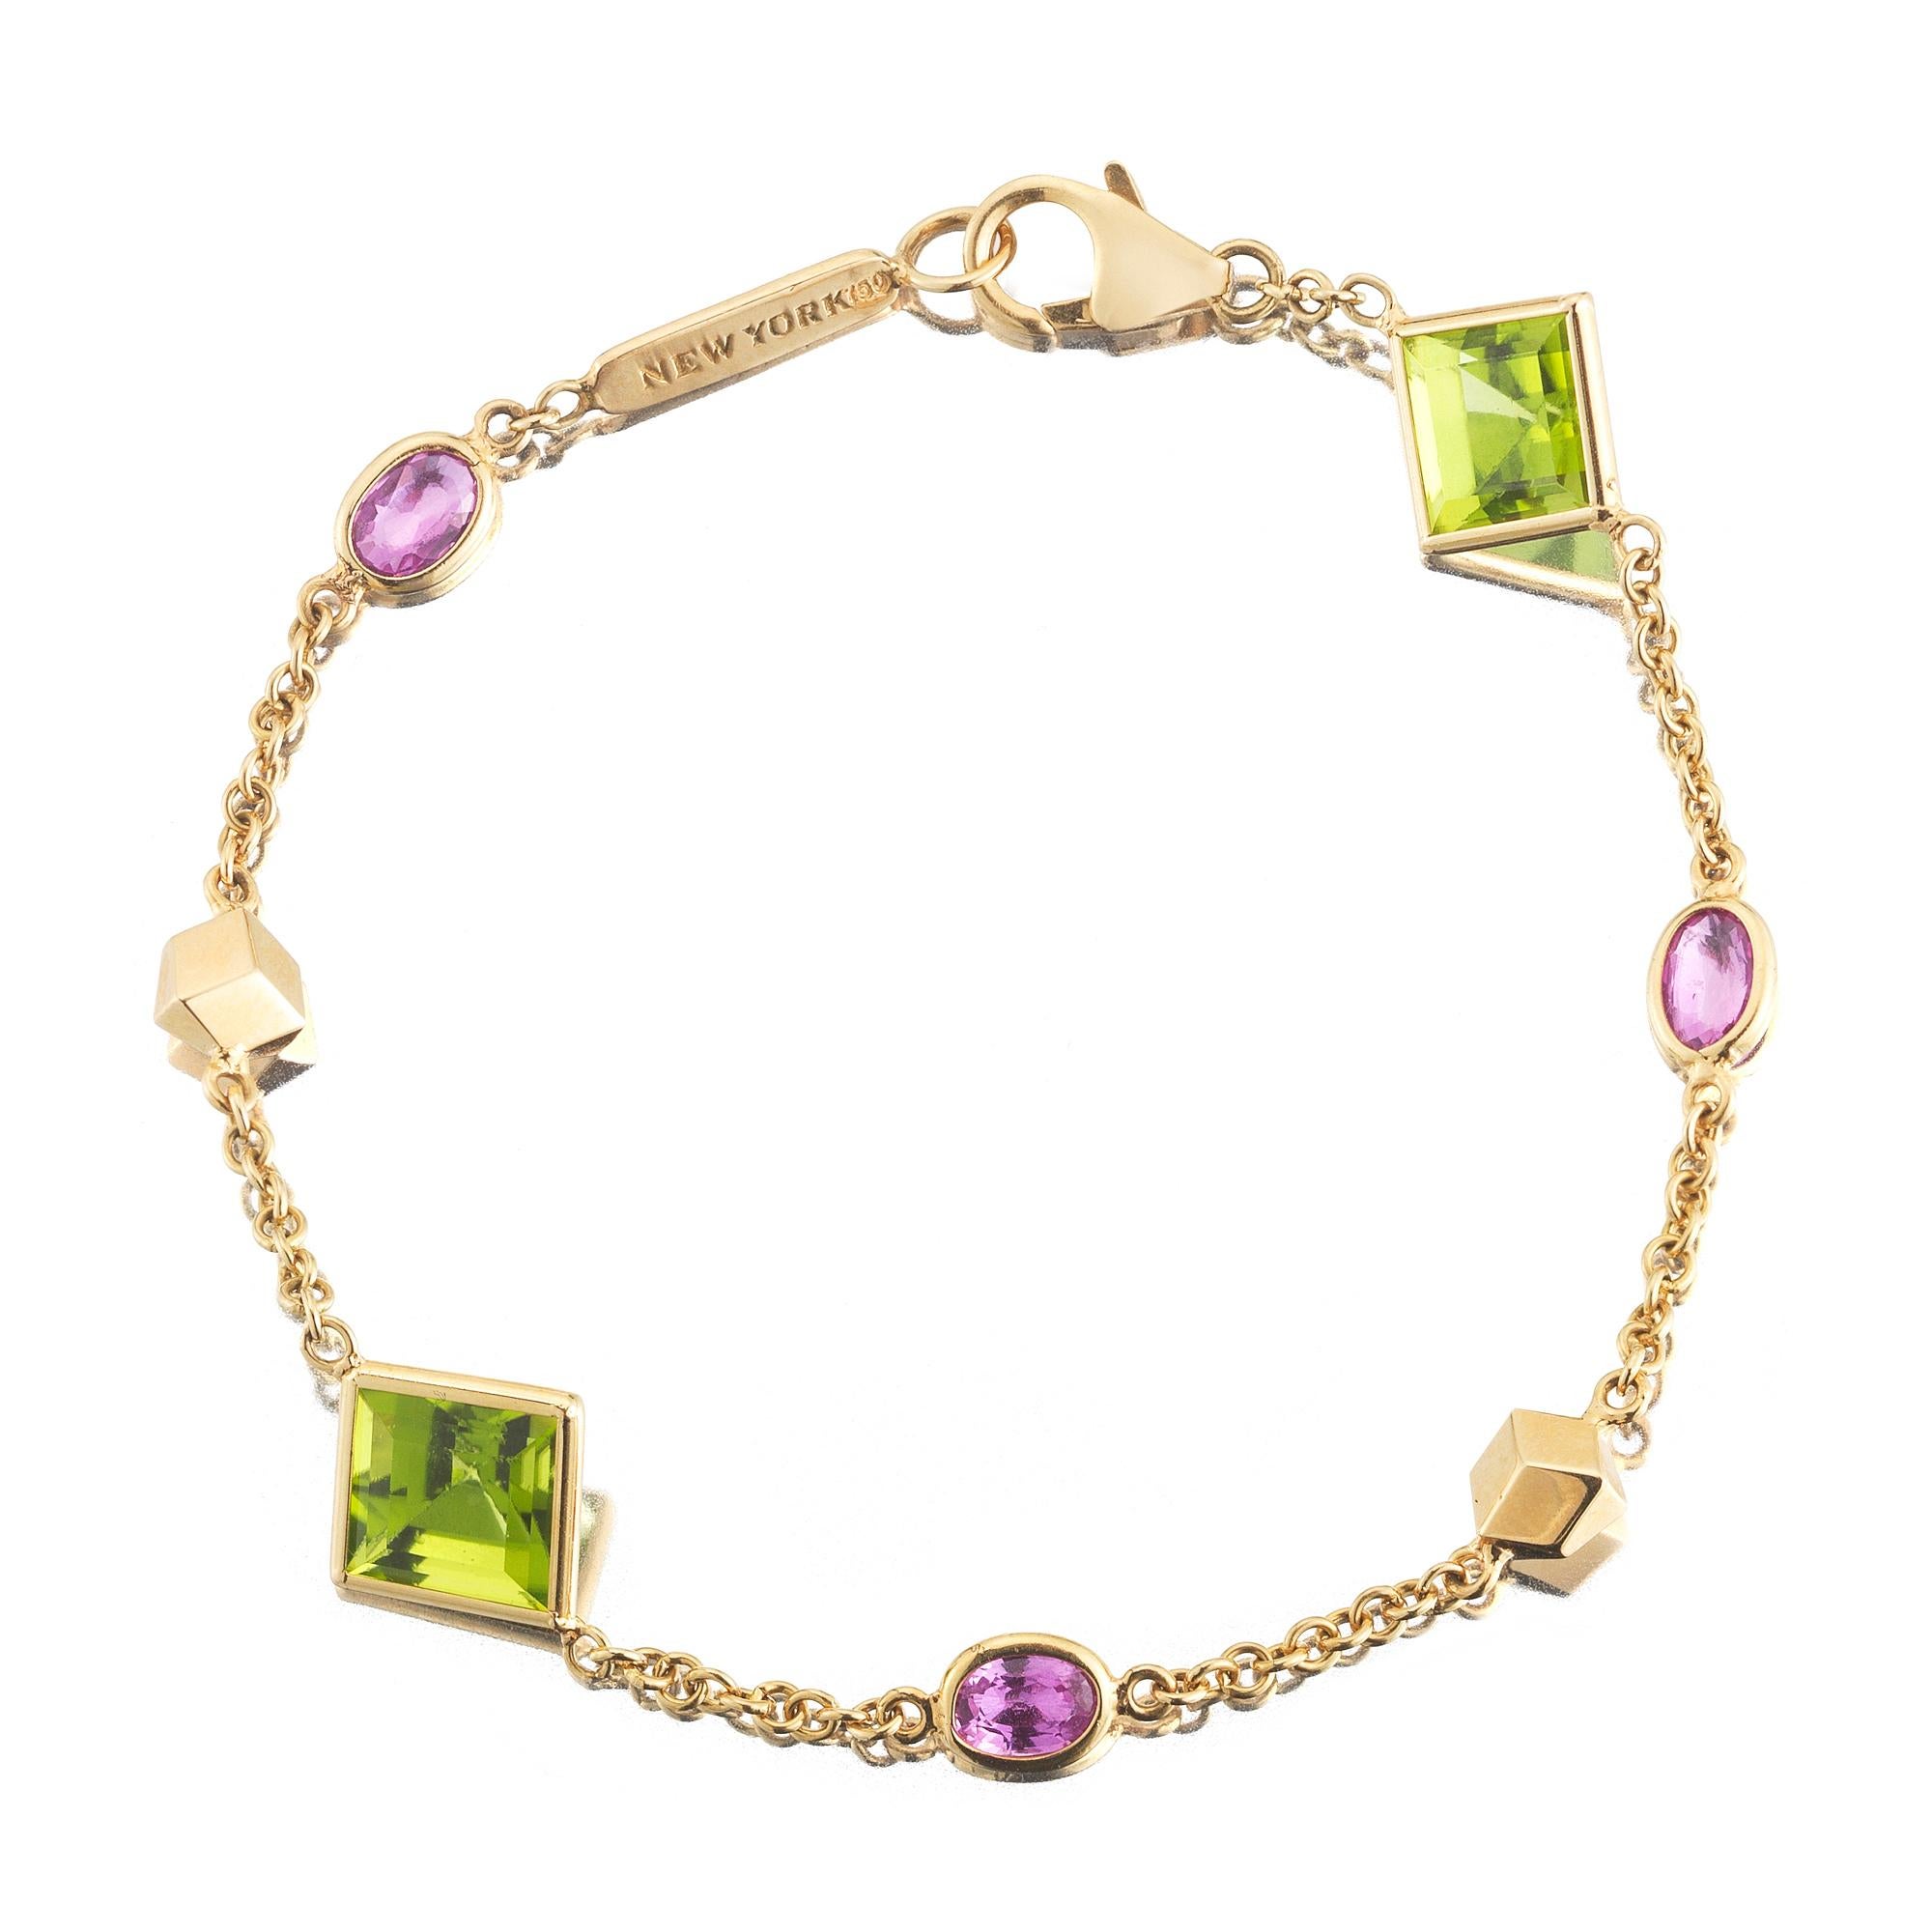 Paolo Costagli 18K Yellow Gold Florentine Bracelet with Peridot & Pink Sapphires For Sale